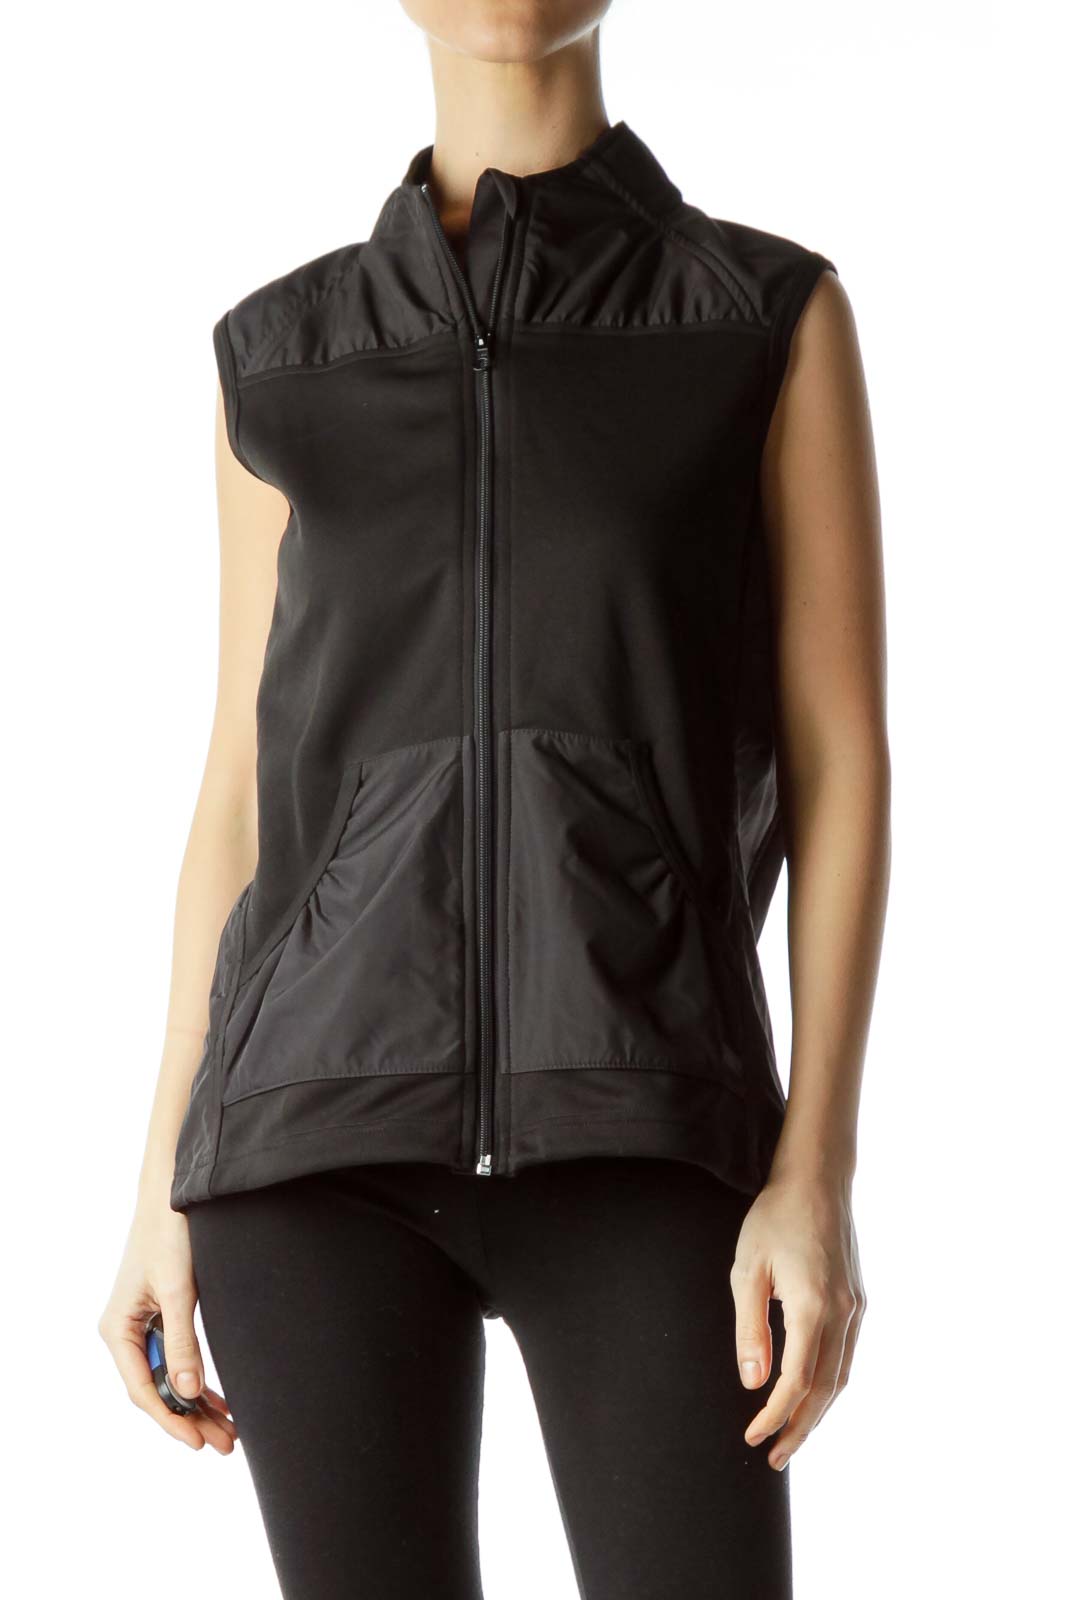 Black Collared Athletic Vest Front